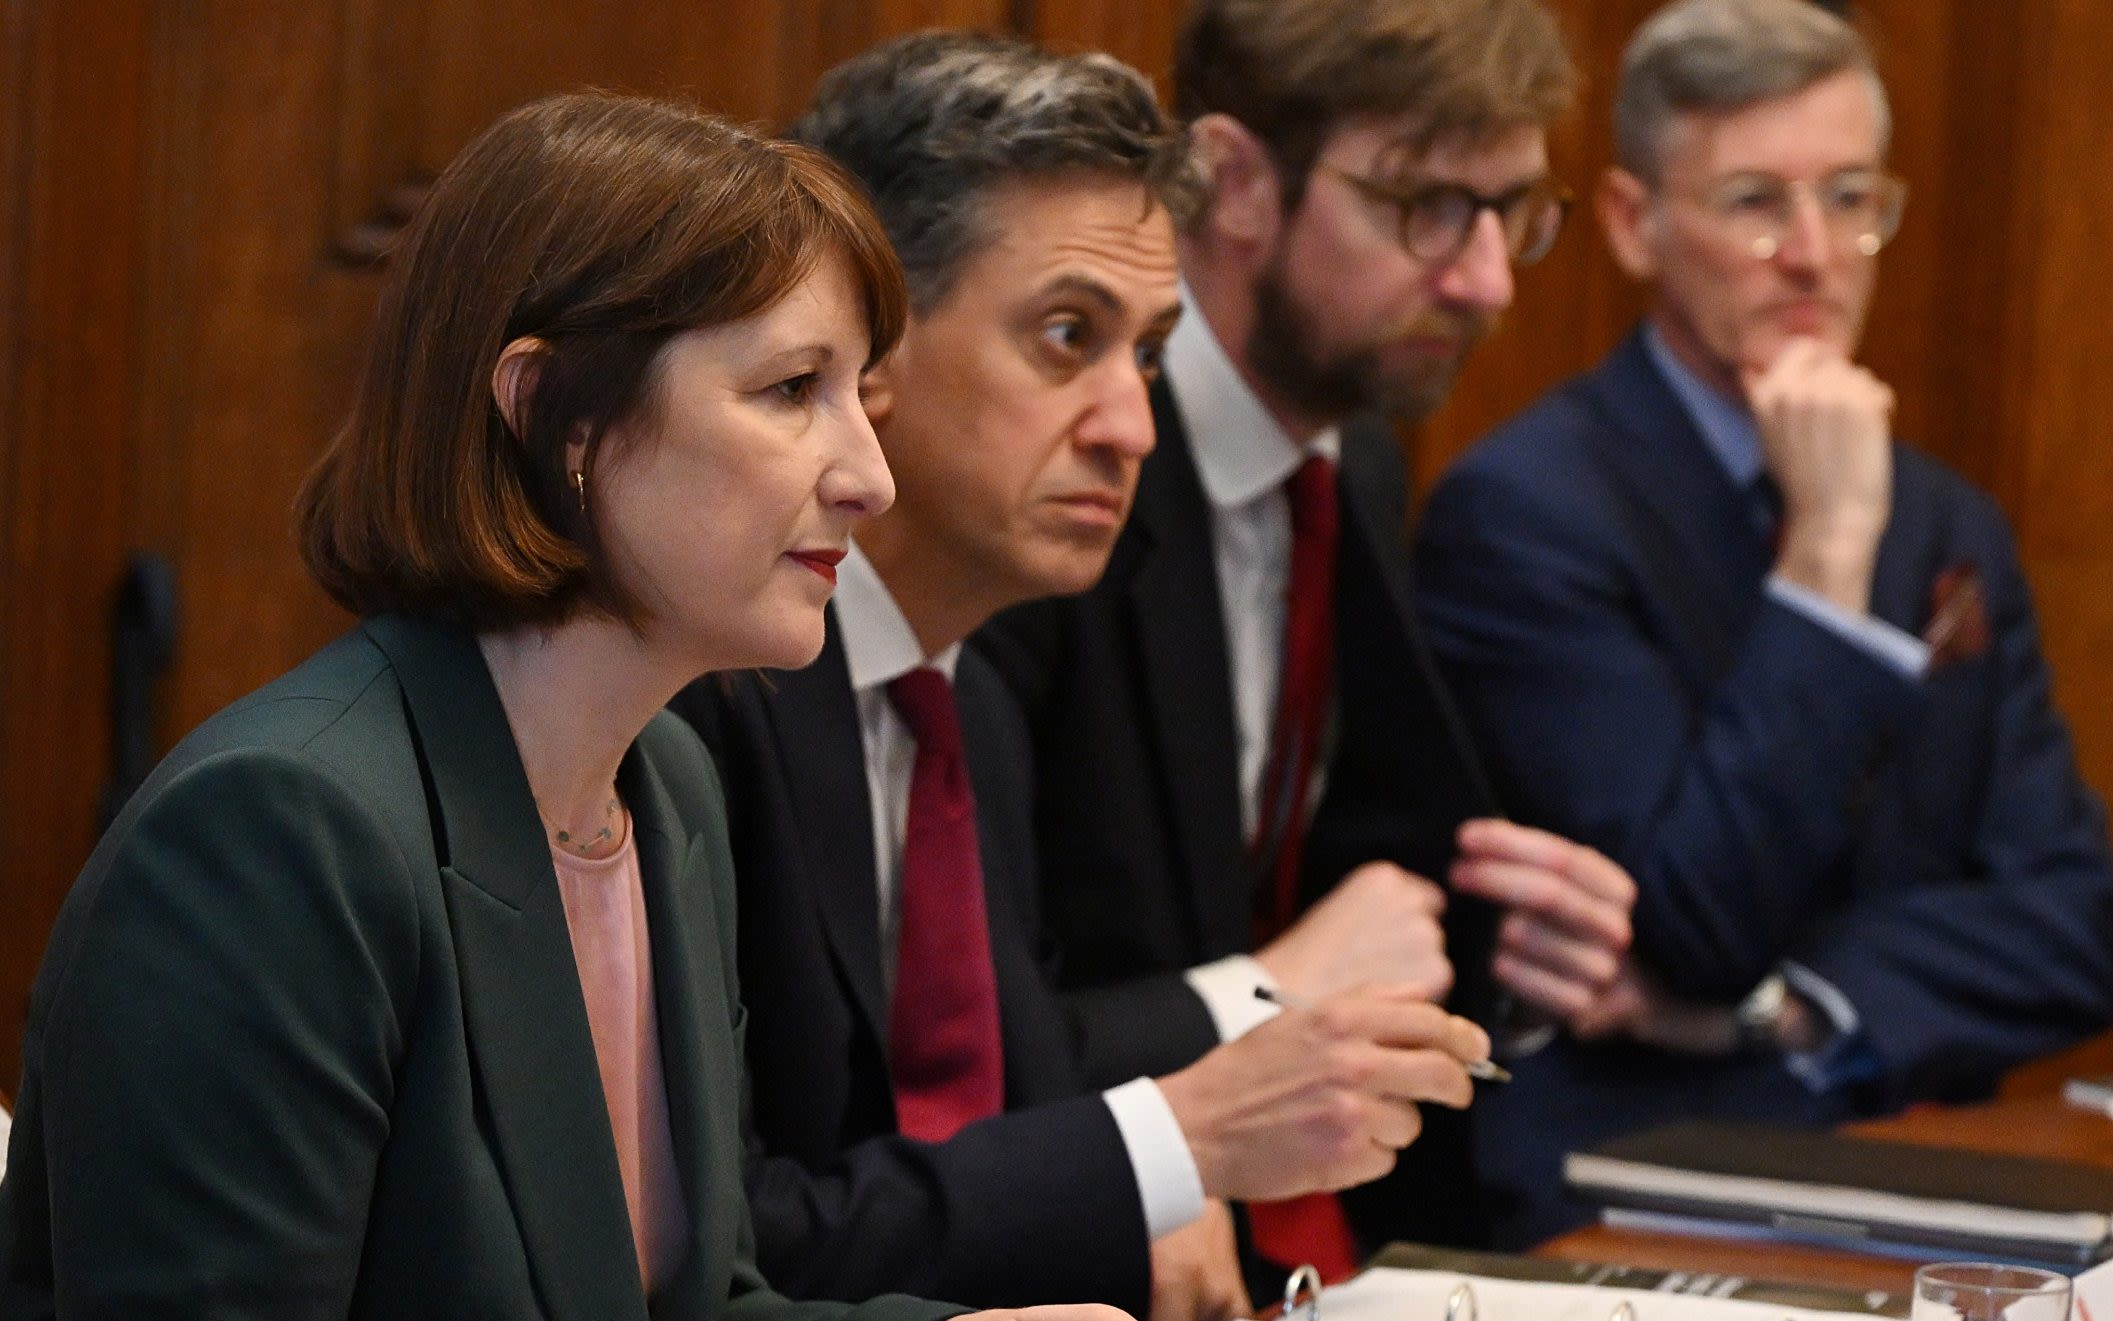 Rachel Reeves must go big and rein in the OBR